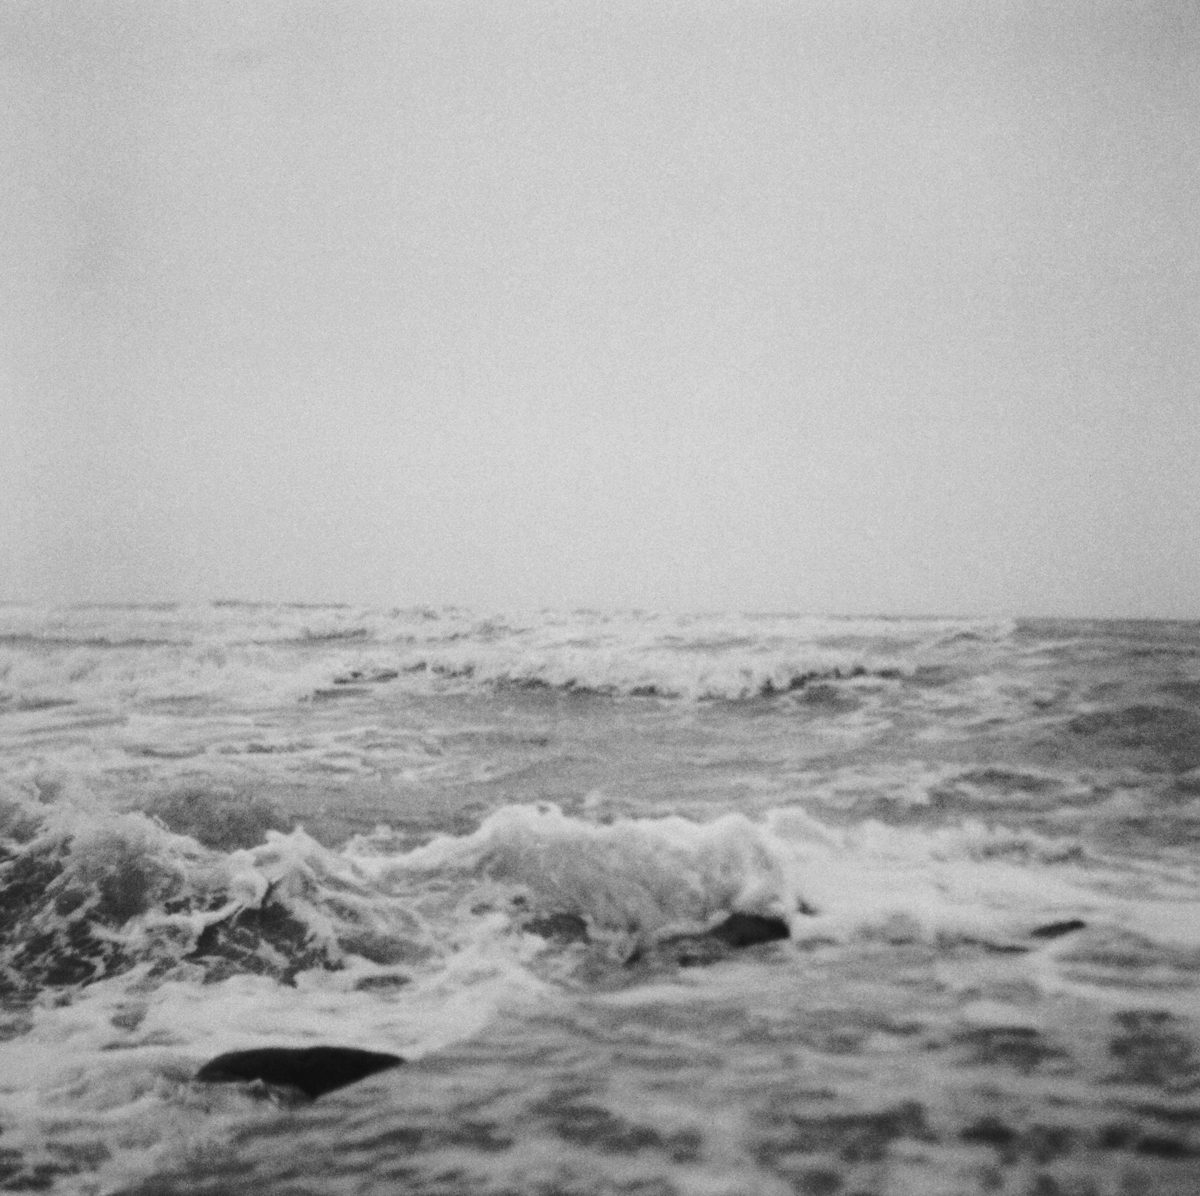 Black and white image of an angry sea with powerful waves